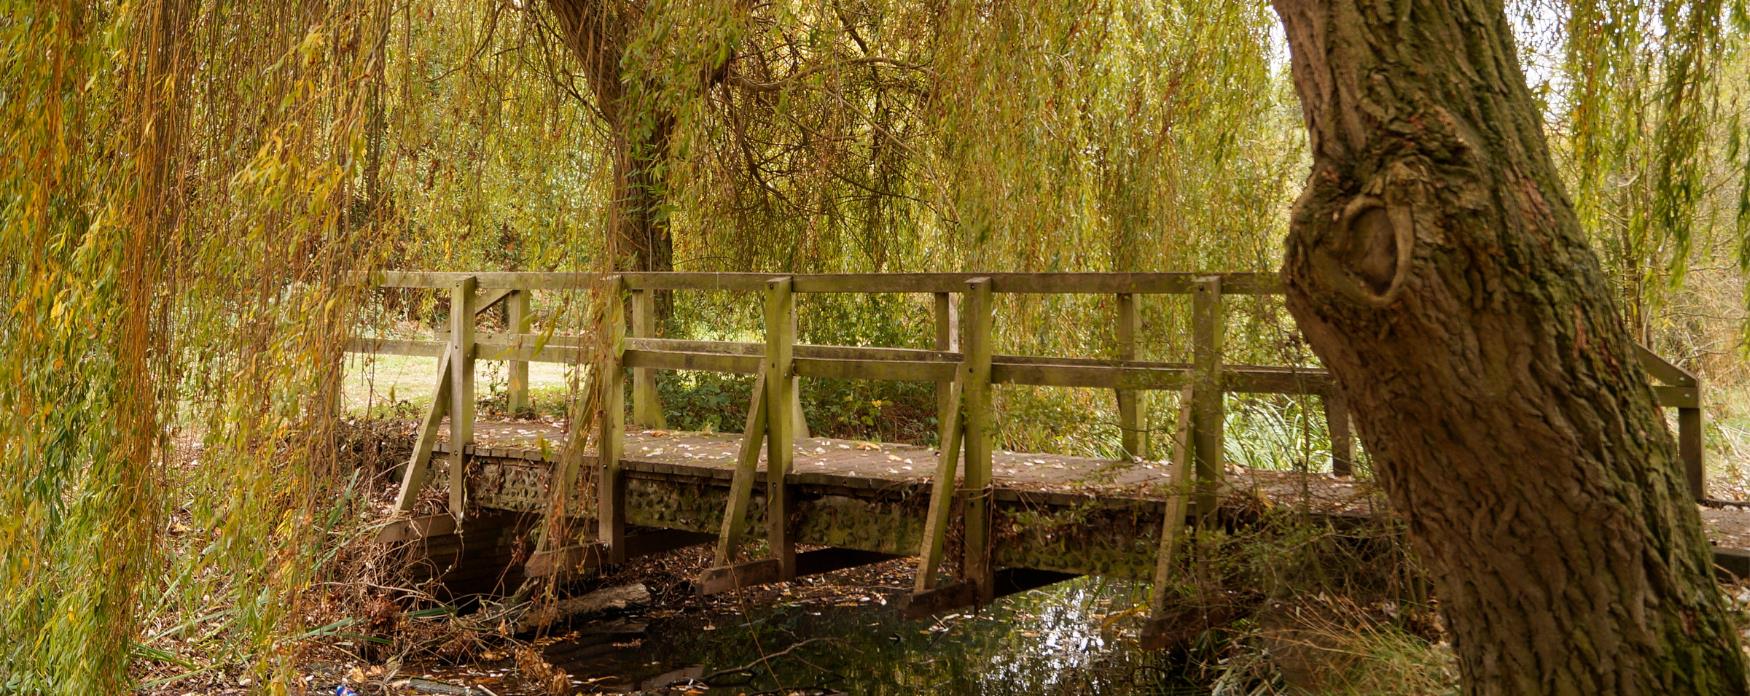 Bridge and willow tree in the autumn